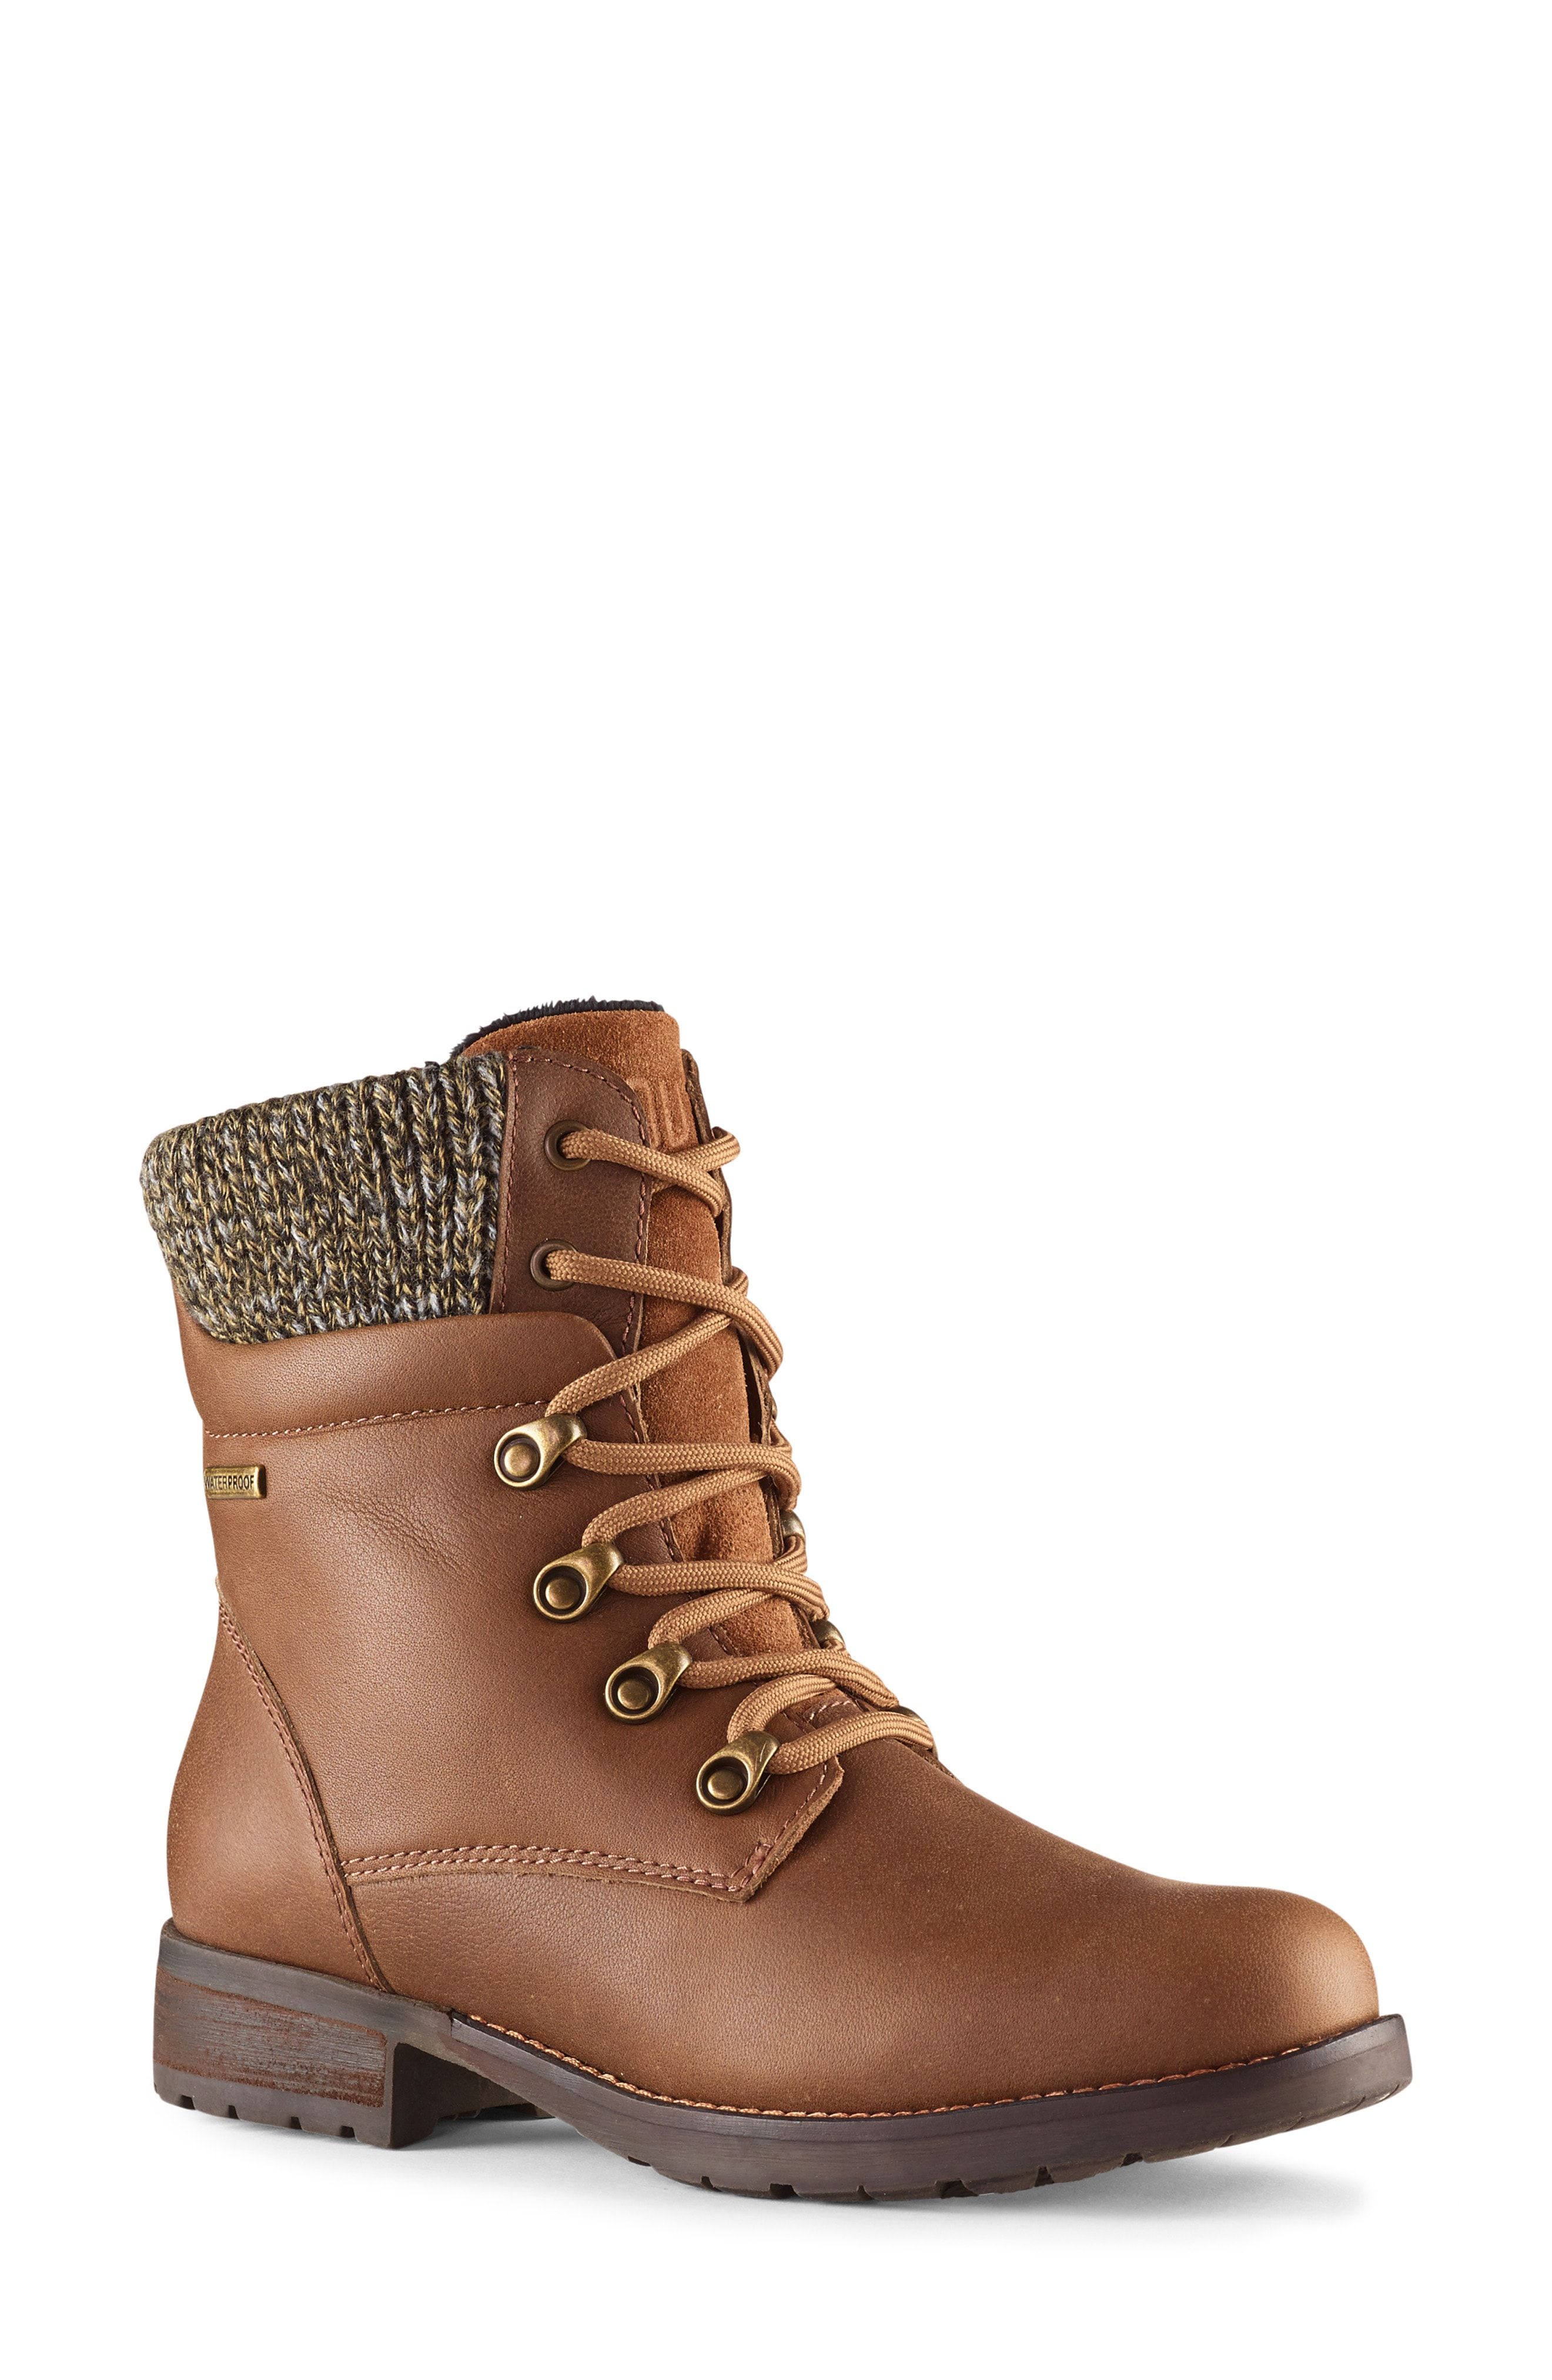 womens boots hiking style